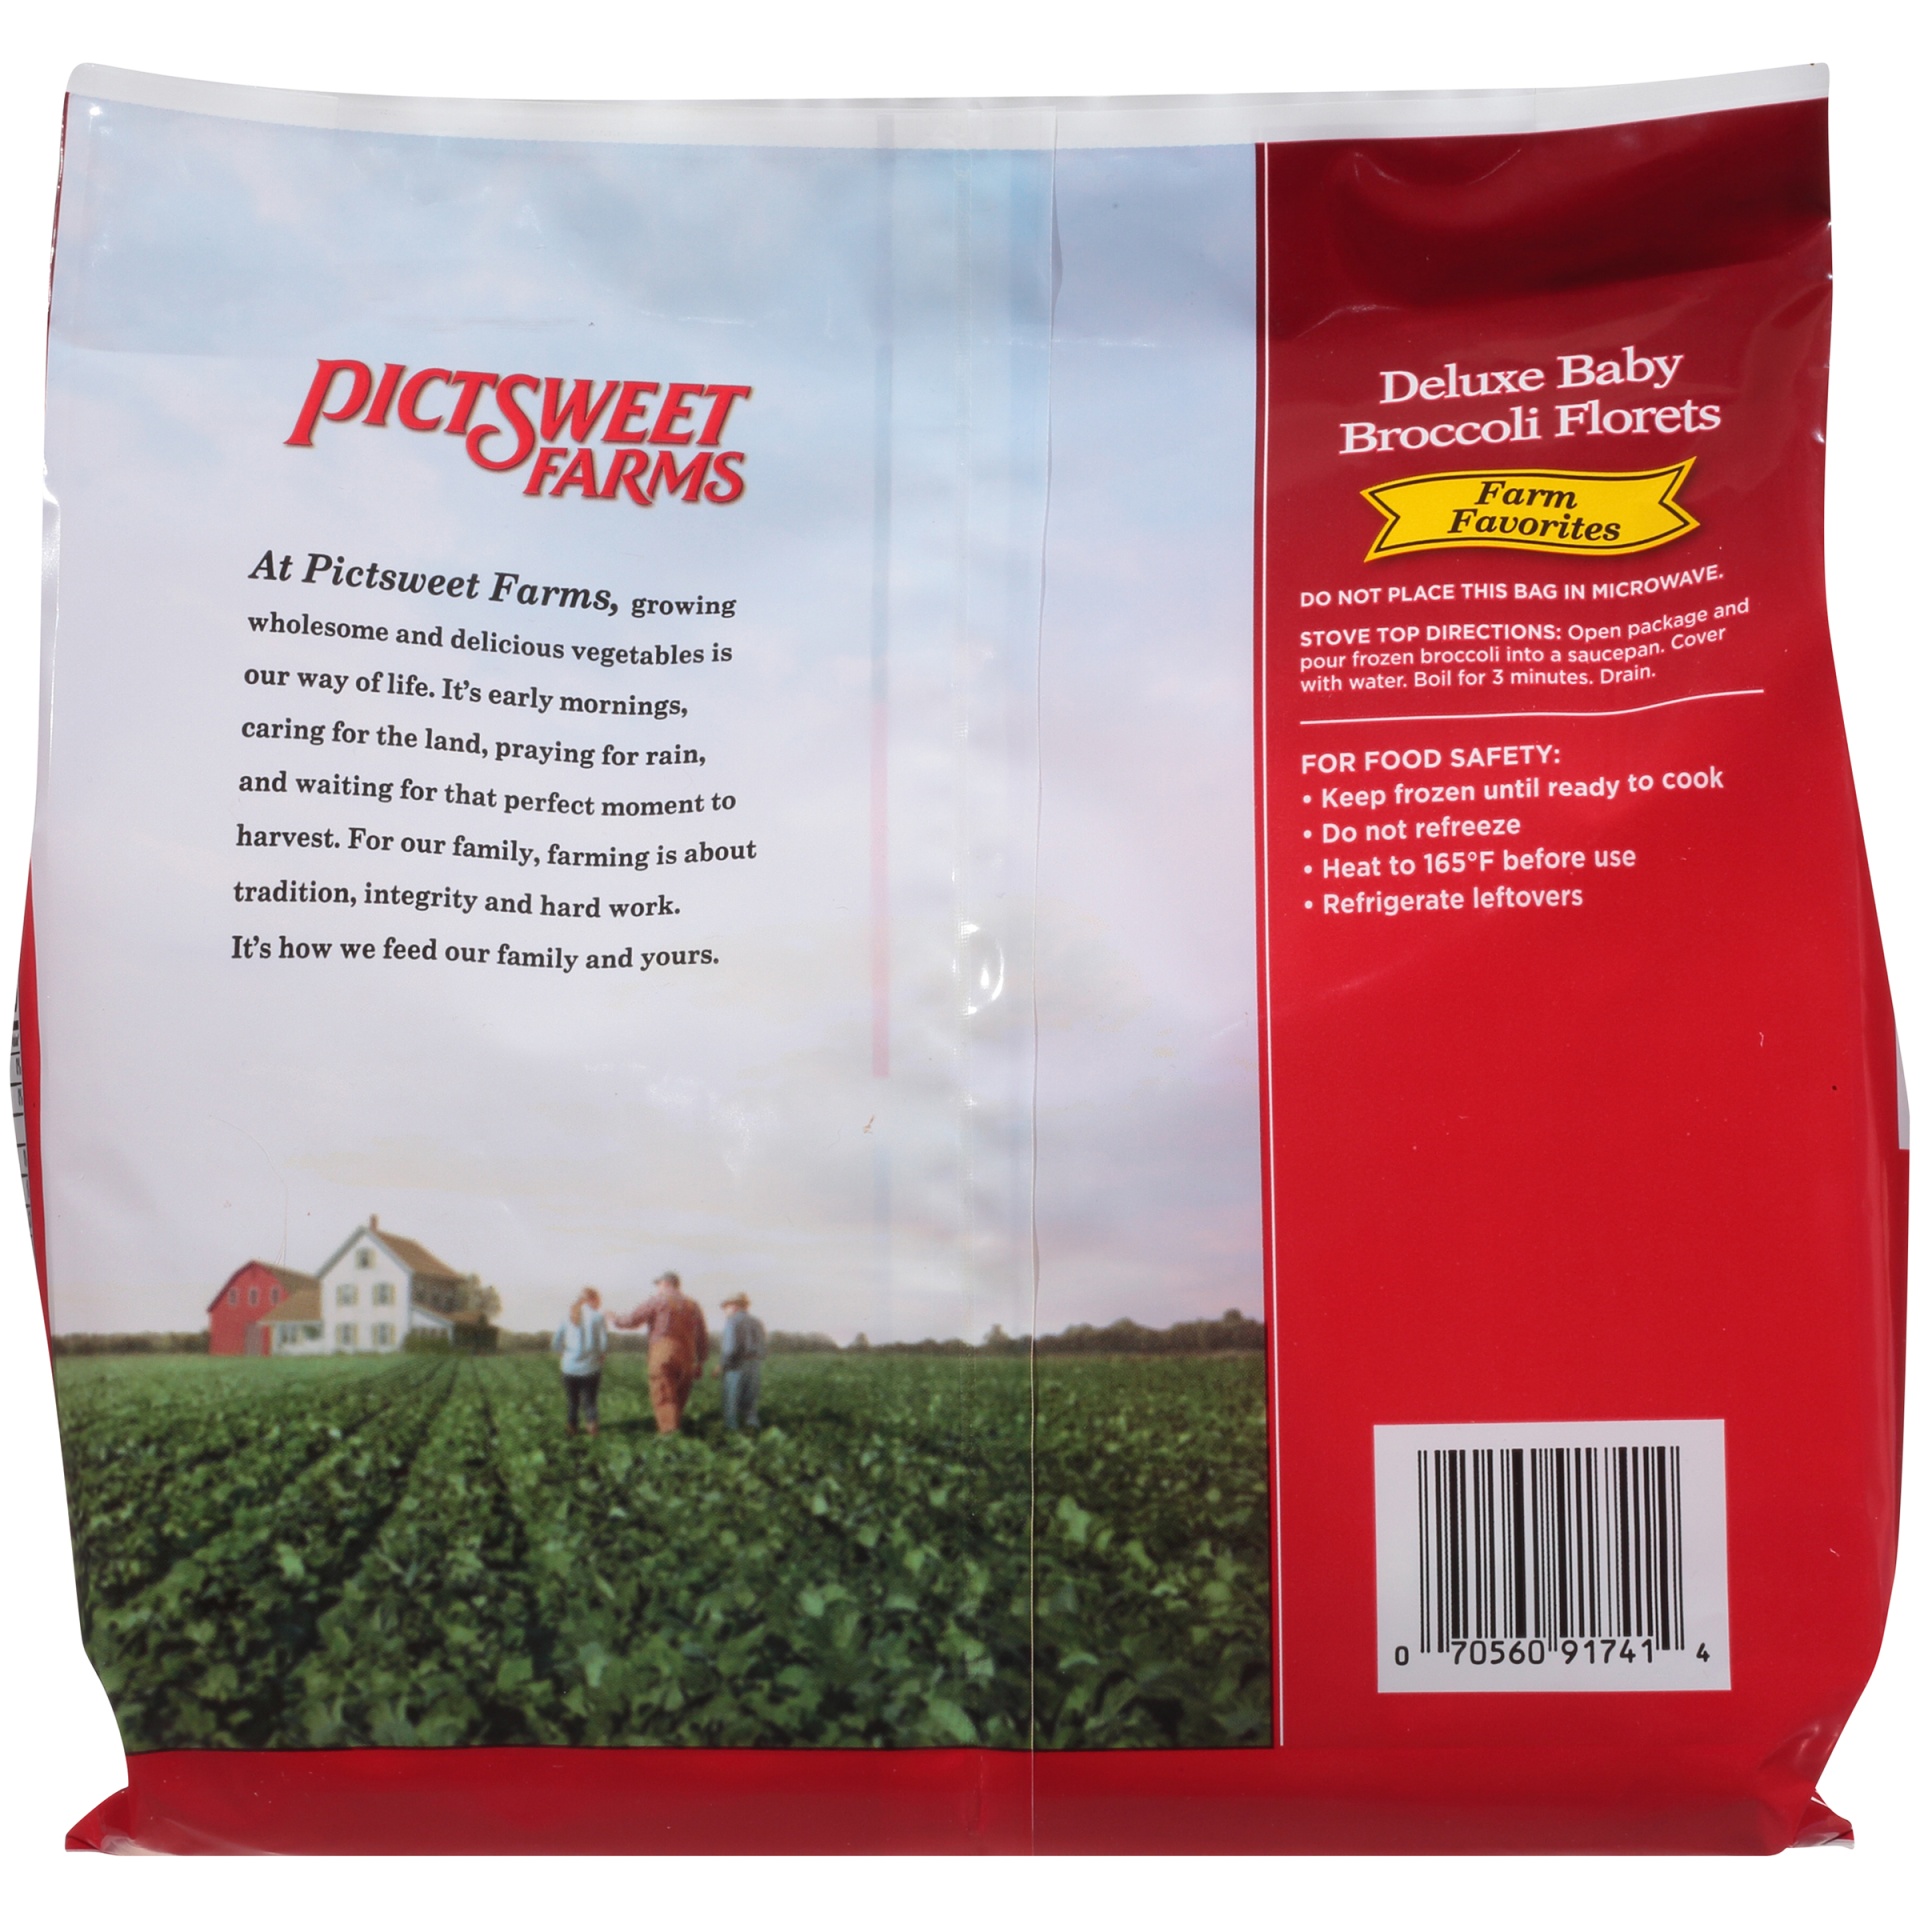 slide 7 of 8, PictSweet Family Size Baby Broccoli Florets, 20 oz